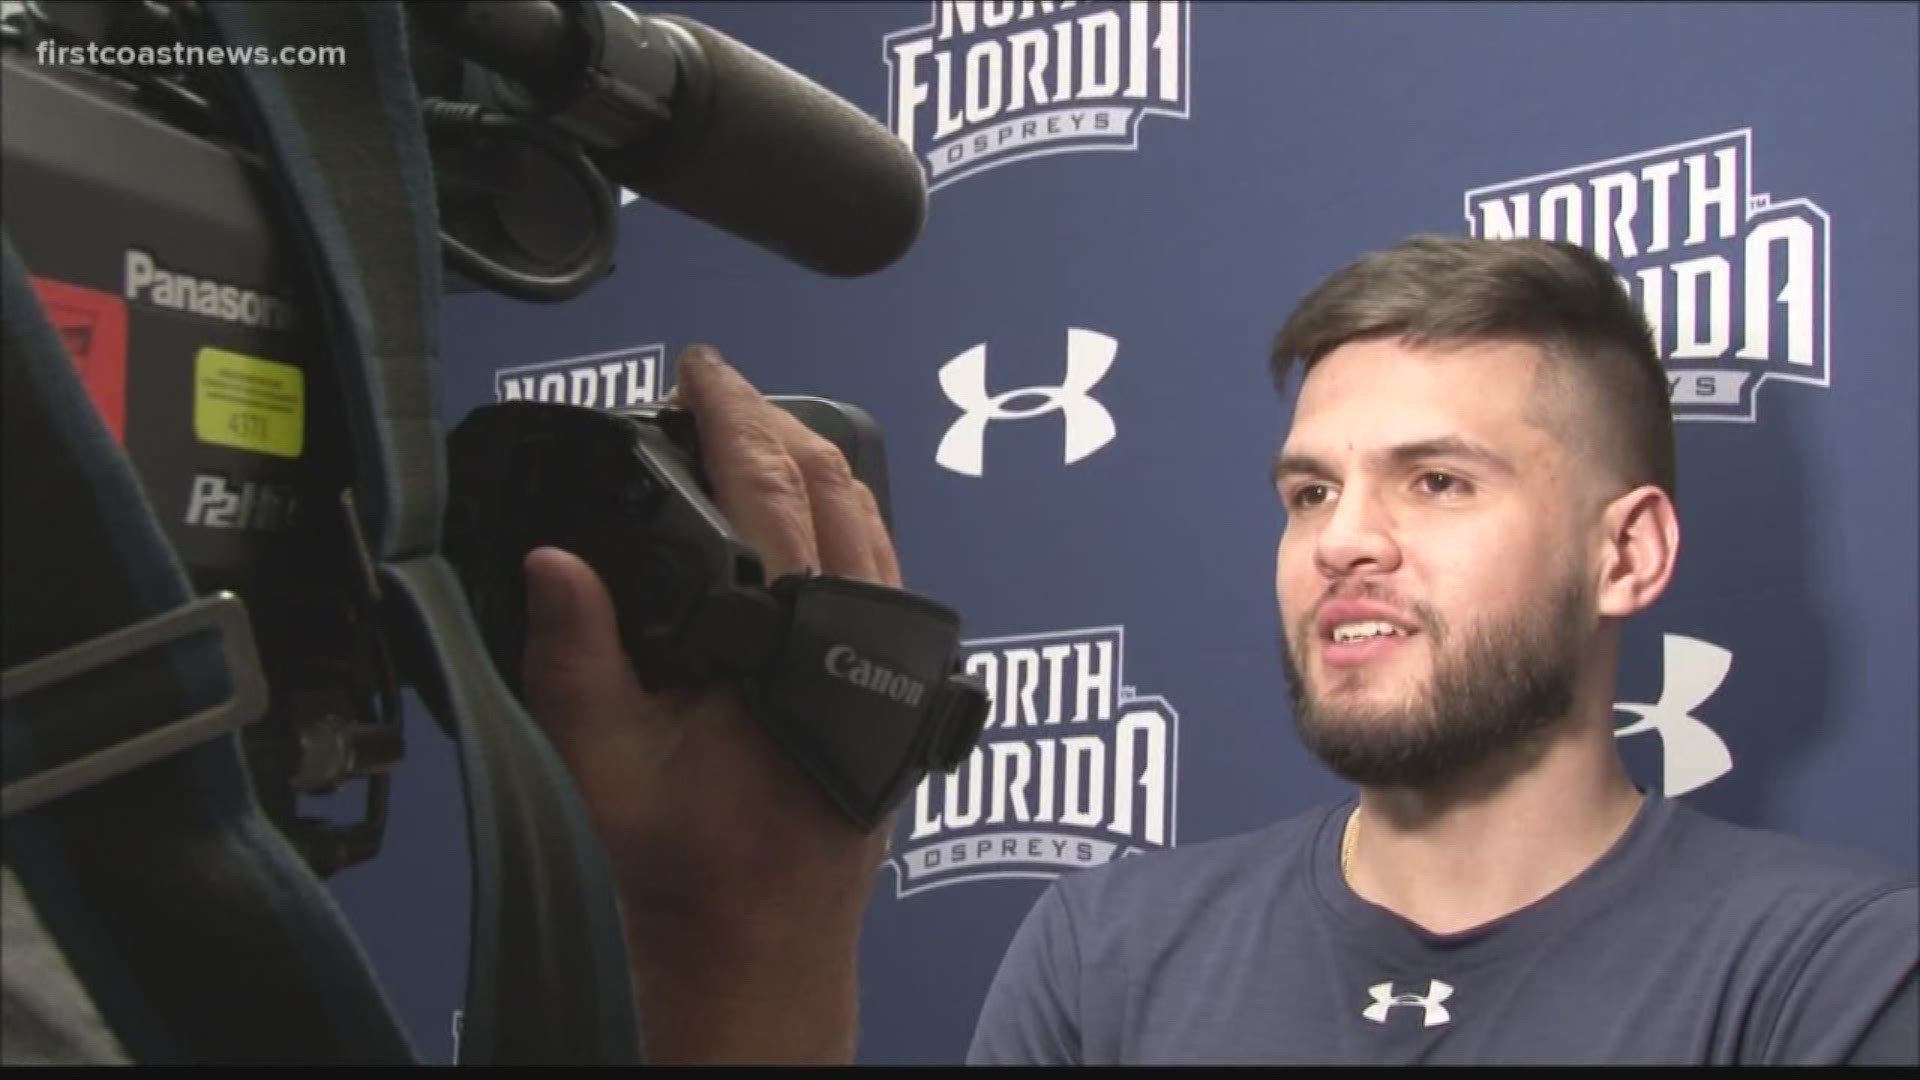 Both the UNF men's and women's basketball teams met the media for the first time Tuesday to discuss their upcoming seasons.